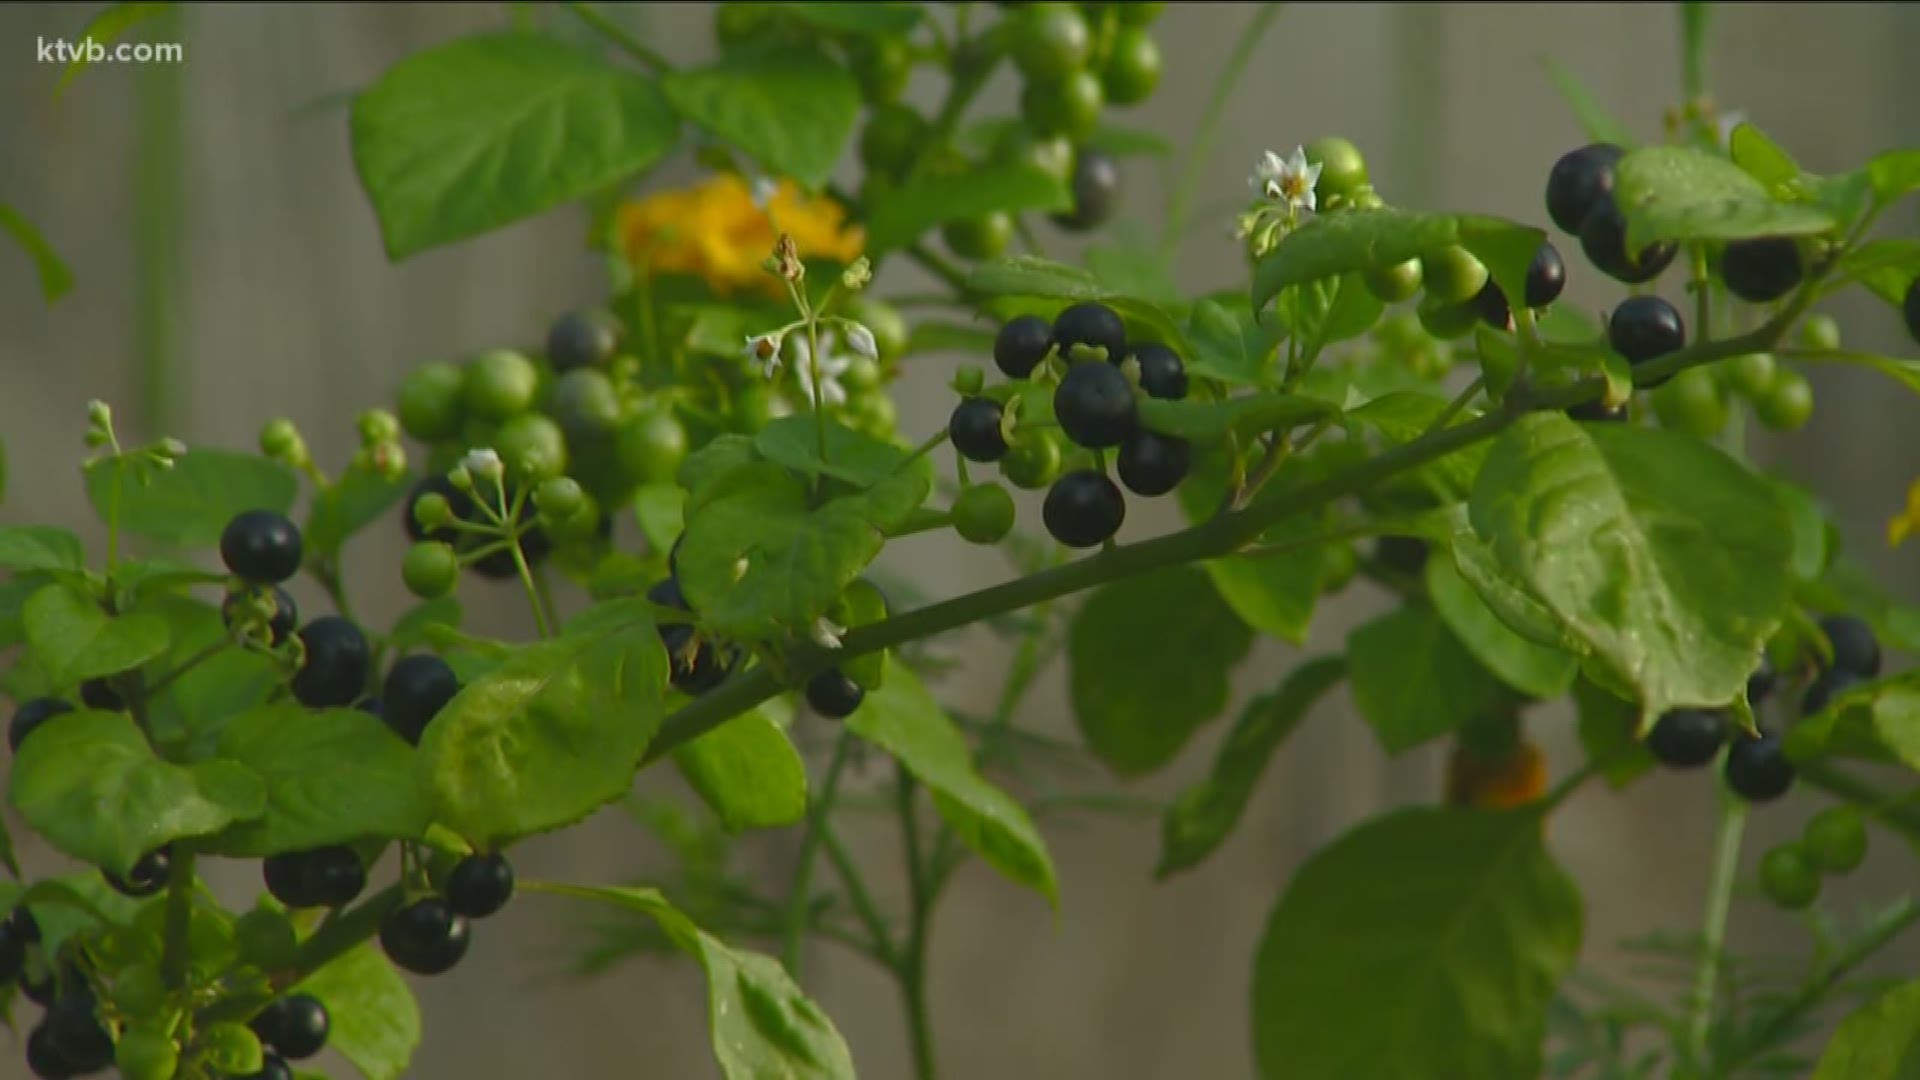 Jim Duthie shows us a variety of huckleberries that grow well in Idaho.